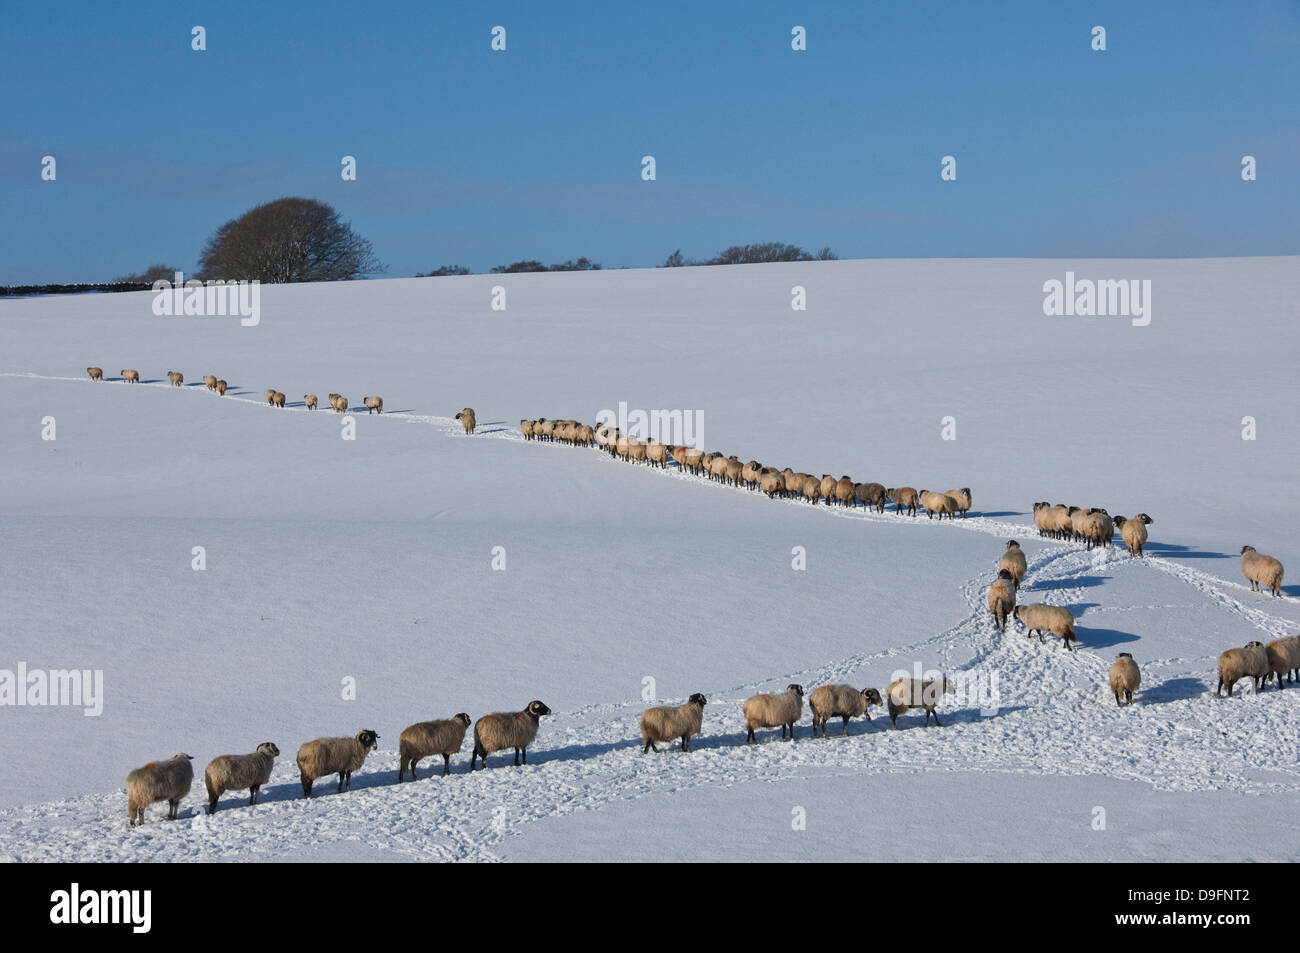 A file of sheep across snow, Lower Pennines, Eden Valley, Cumbria, England, UK Stock Photo